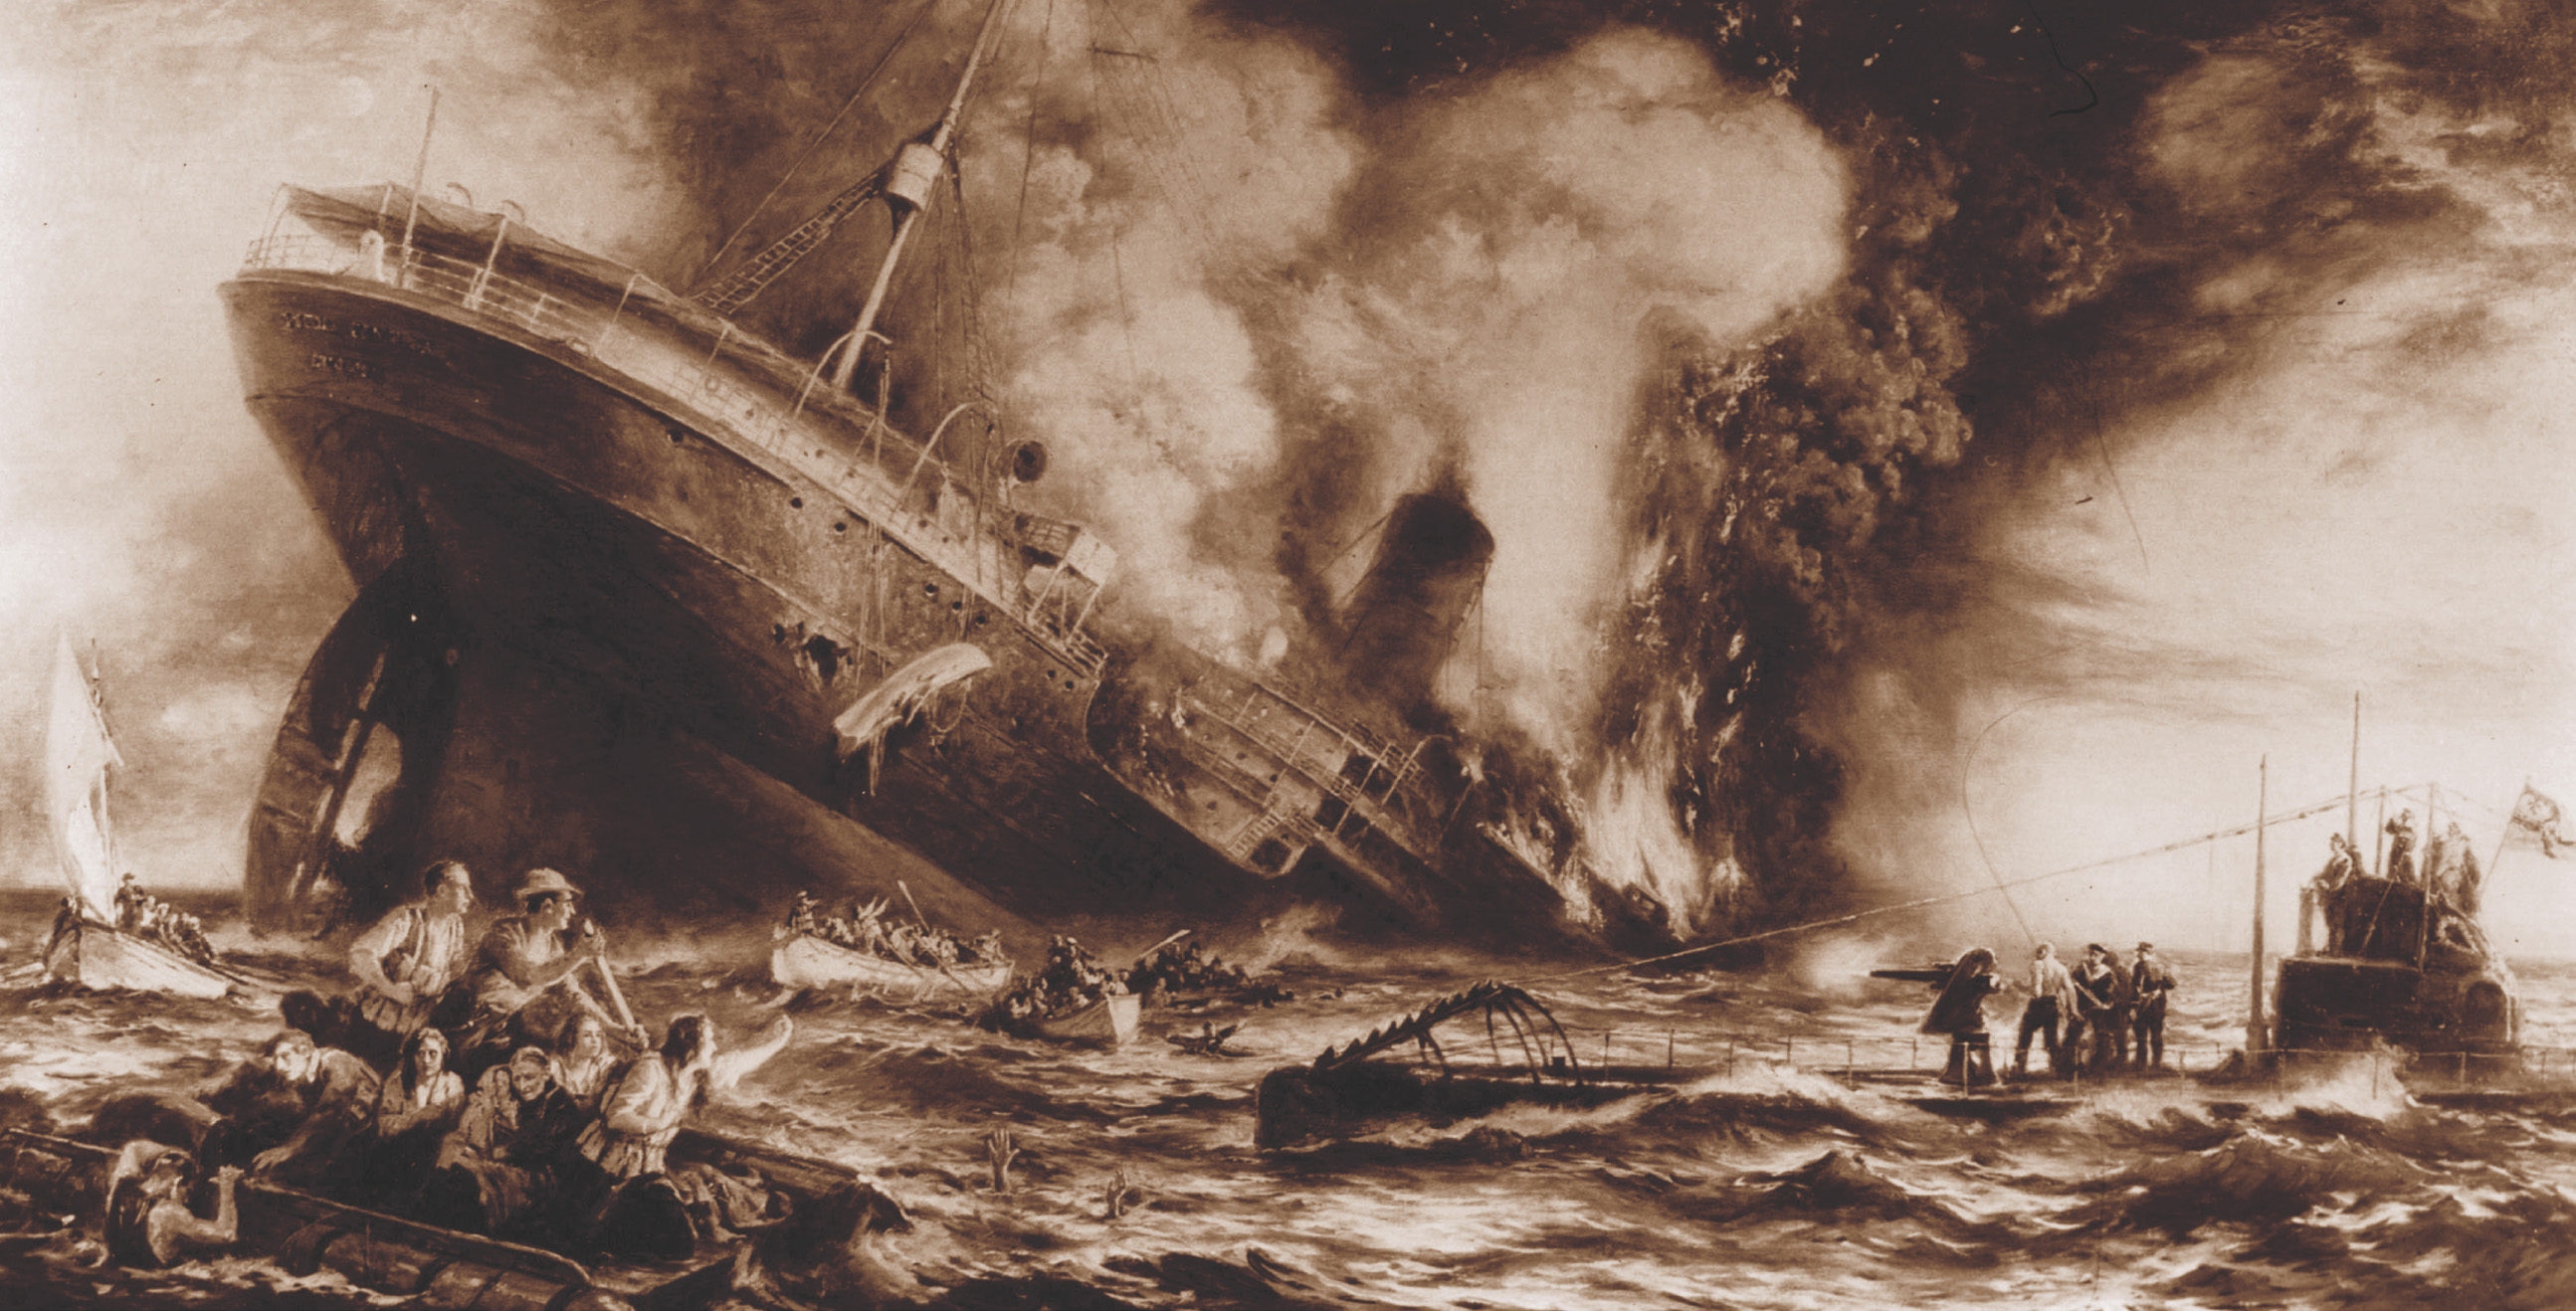 Painting: As the Lusitania sinks, survivors crowd into lifeboats.